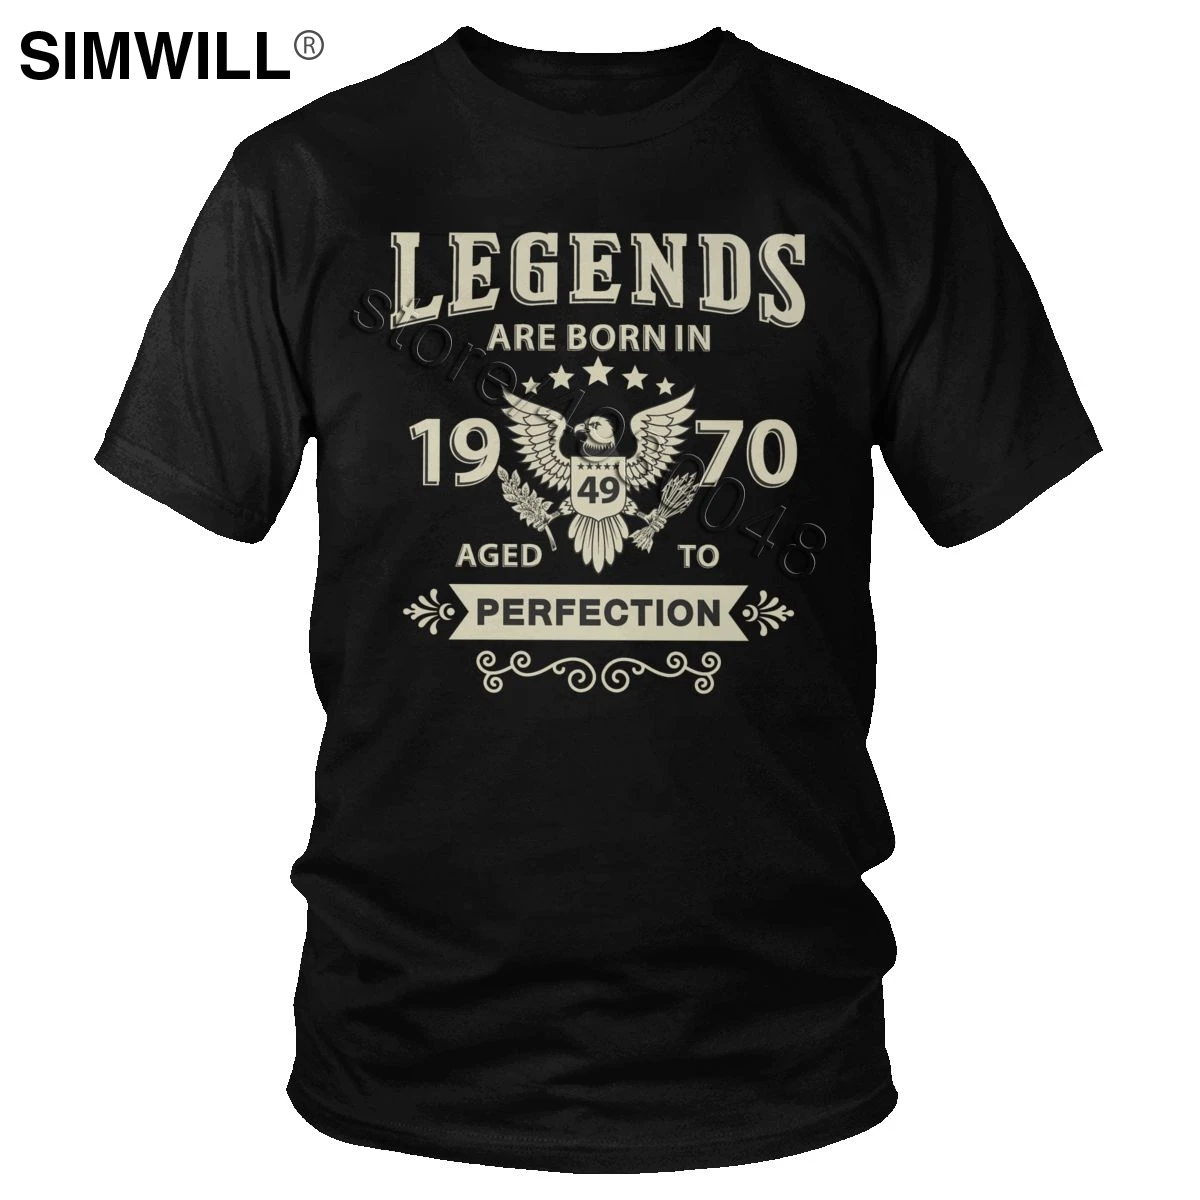 Vintage Legends Are Born In 1970 T Shirt Men Short Sleeved Cotton Tee Age To Perfection Tshirt 50 Years Birthday Gift T-shirt